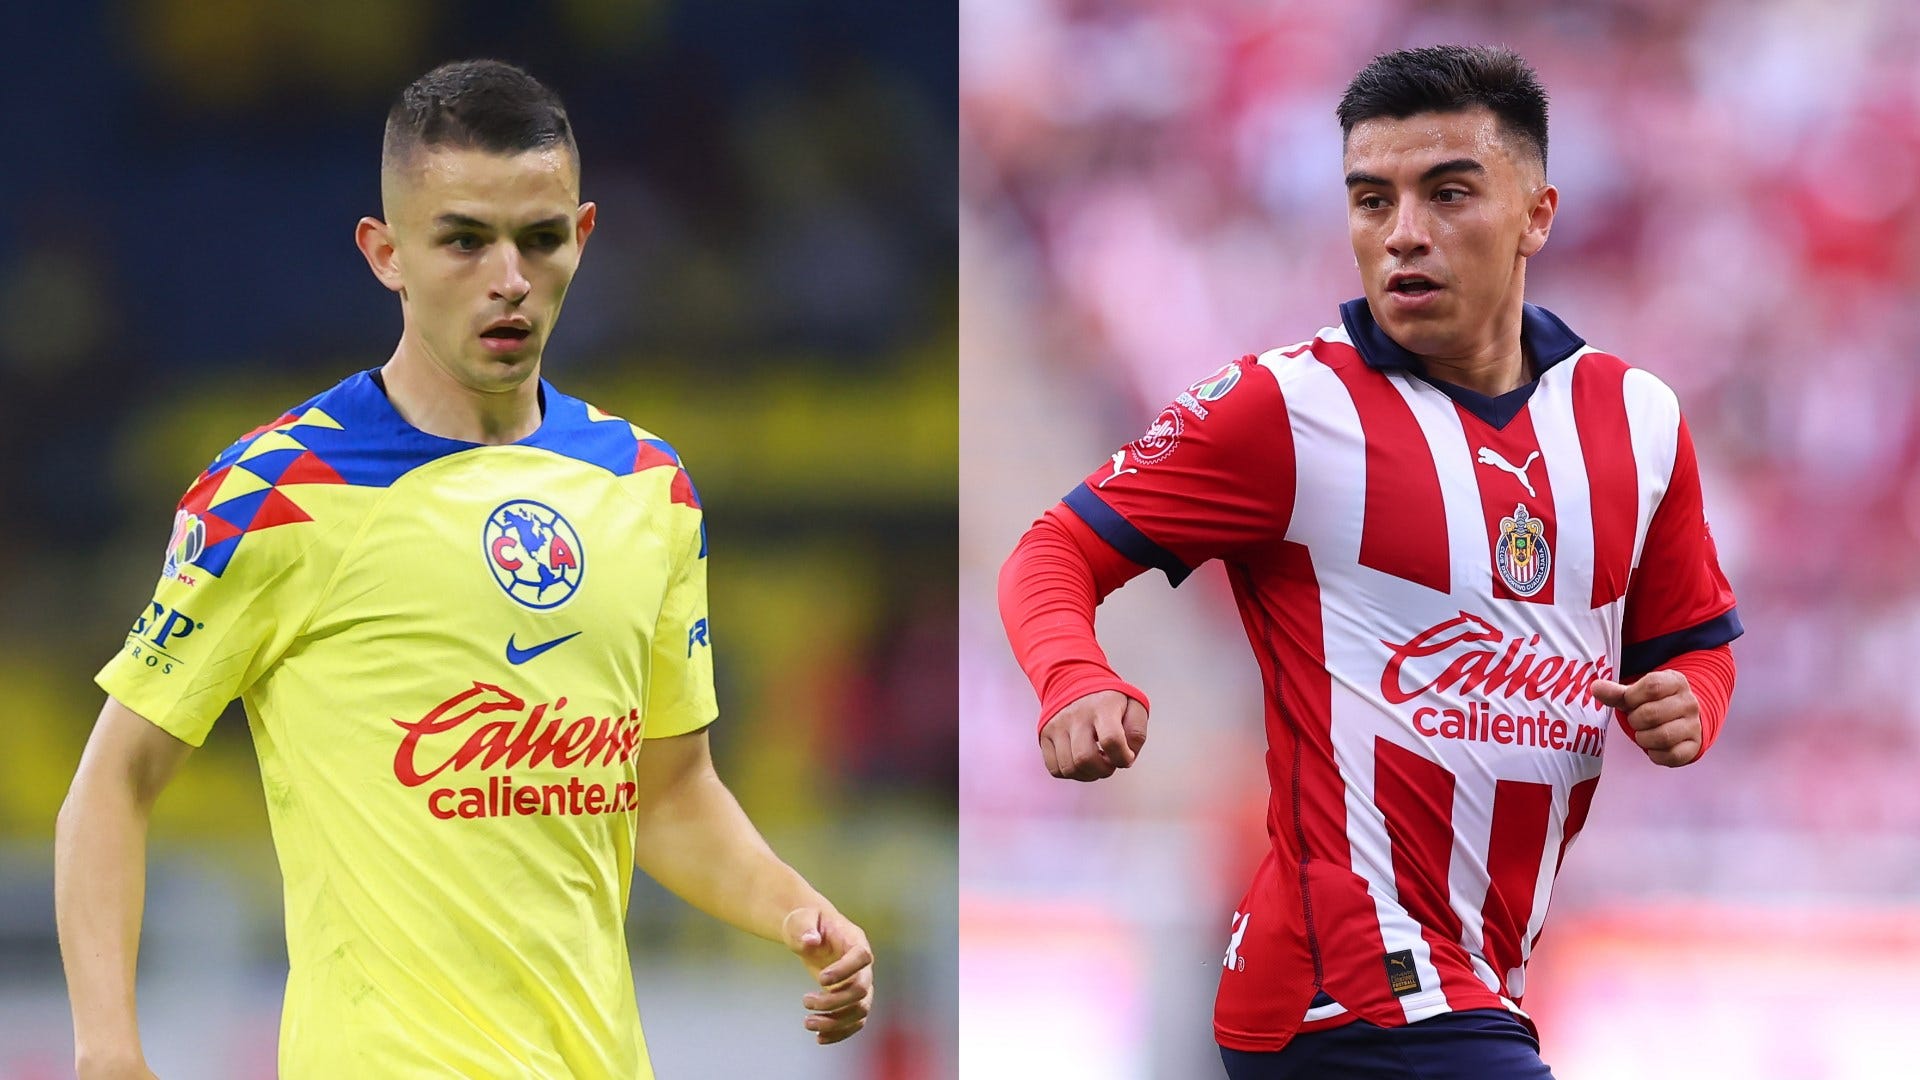 World Soccer Talk: 1.9 million tune in to watch Club America vs. Chivas on  Univision and Univision Deportes - TelevisaUnivision